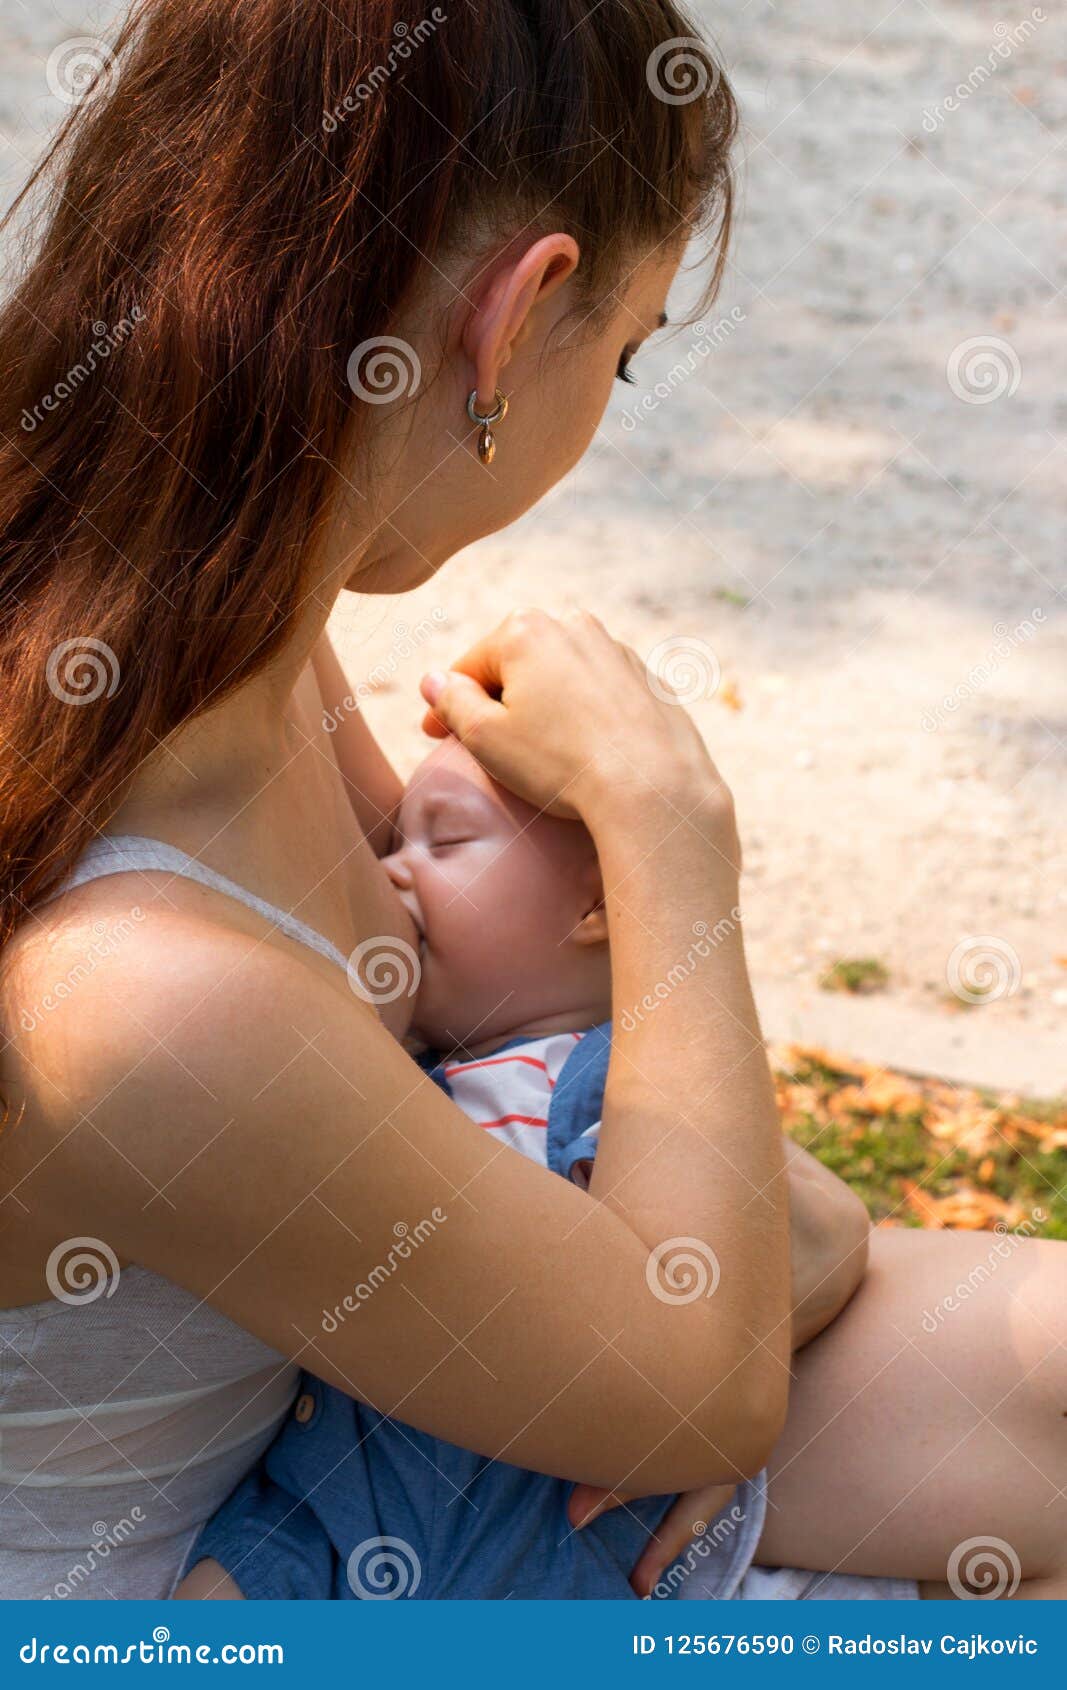 2schoolgirls Suking Video - Young Mother Give Suck Her Breast Milk To Little Baby Outside Stock Photo -  Image of female, feeding: 125676590